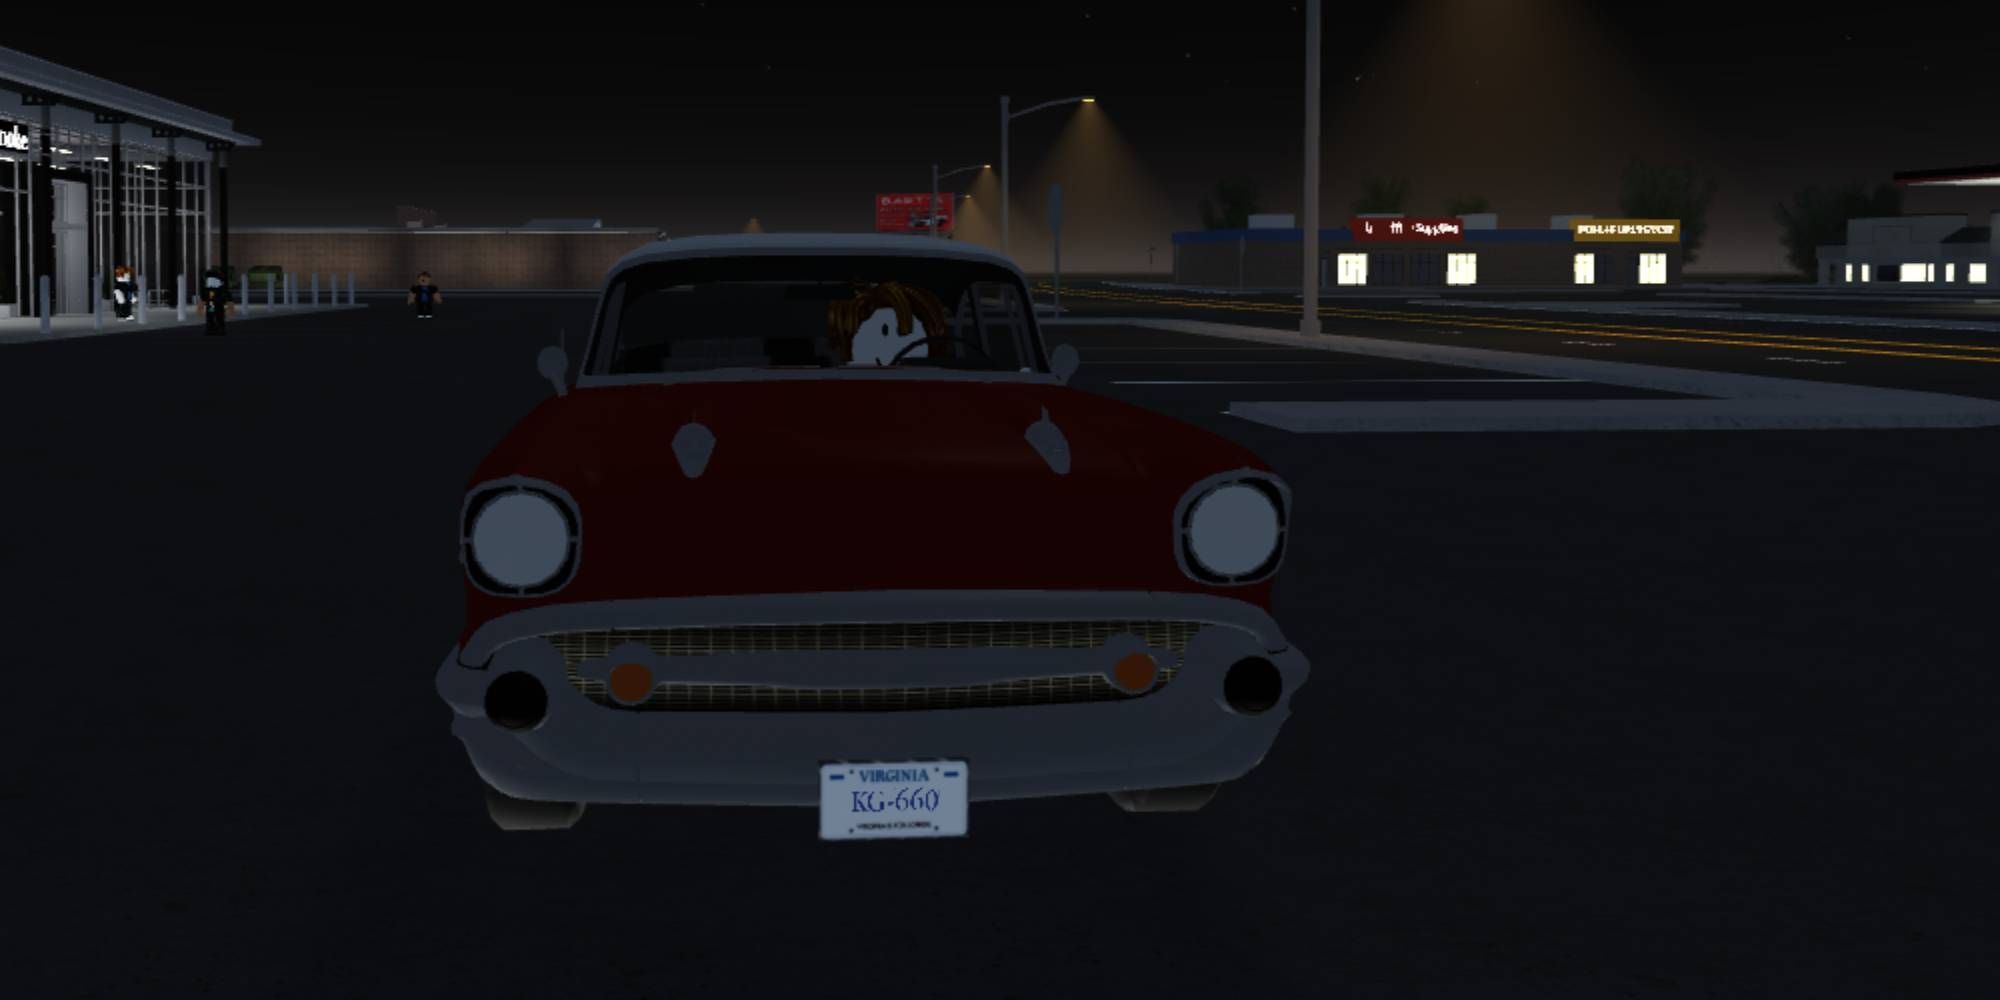 Roanoke player in a classic car in a car park, red car, 1950s style american